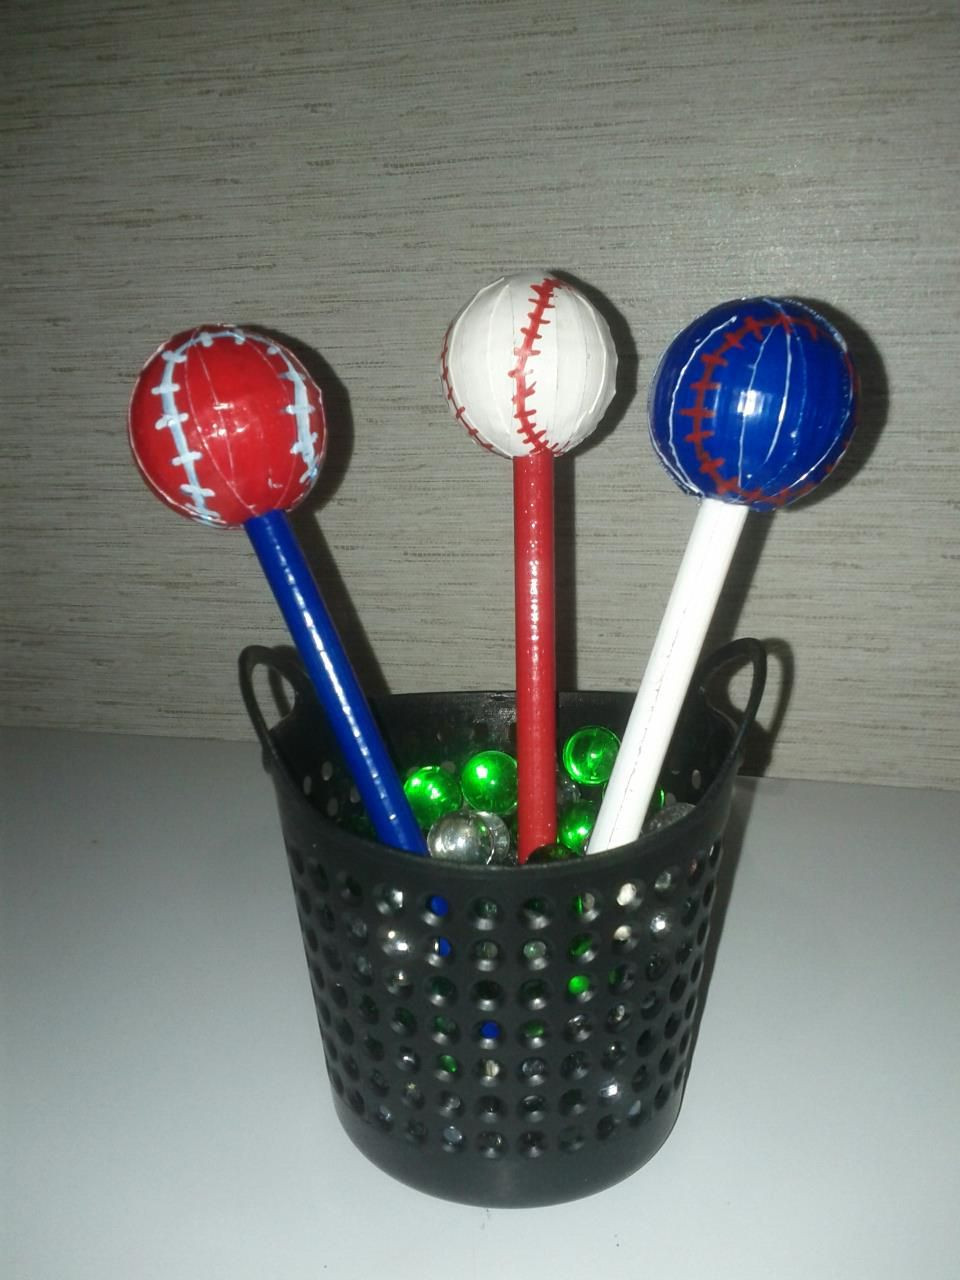 Texas Gifts For Kids
 Texas Rangers Baseball pens made out of duct tape